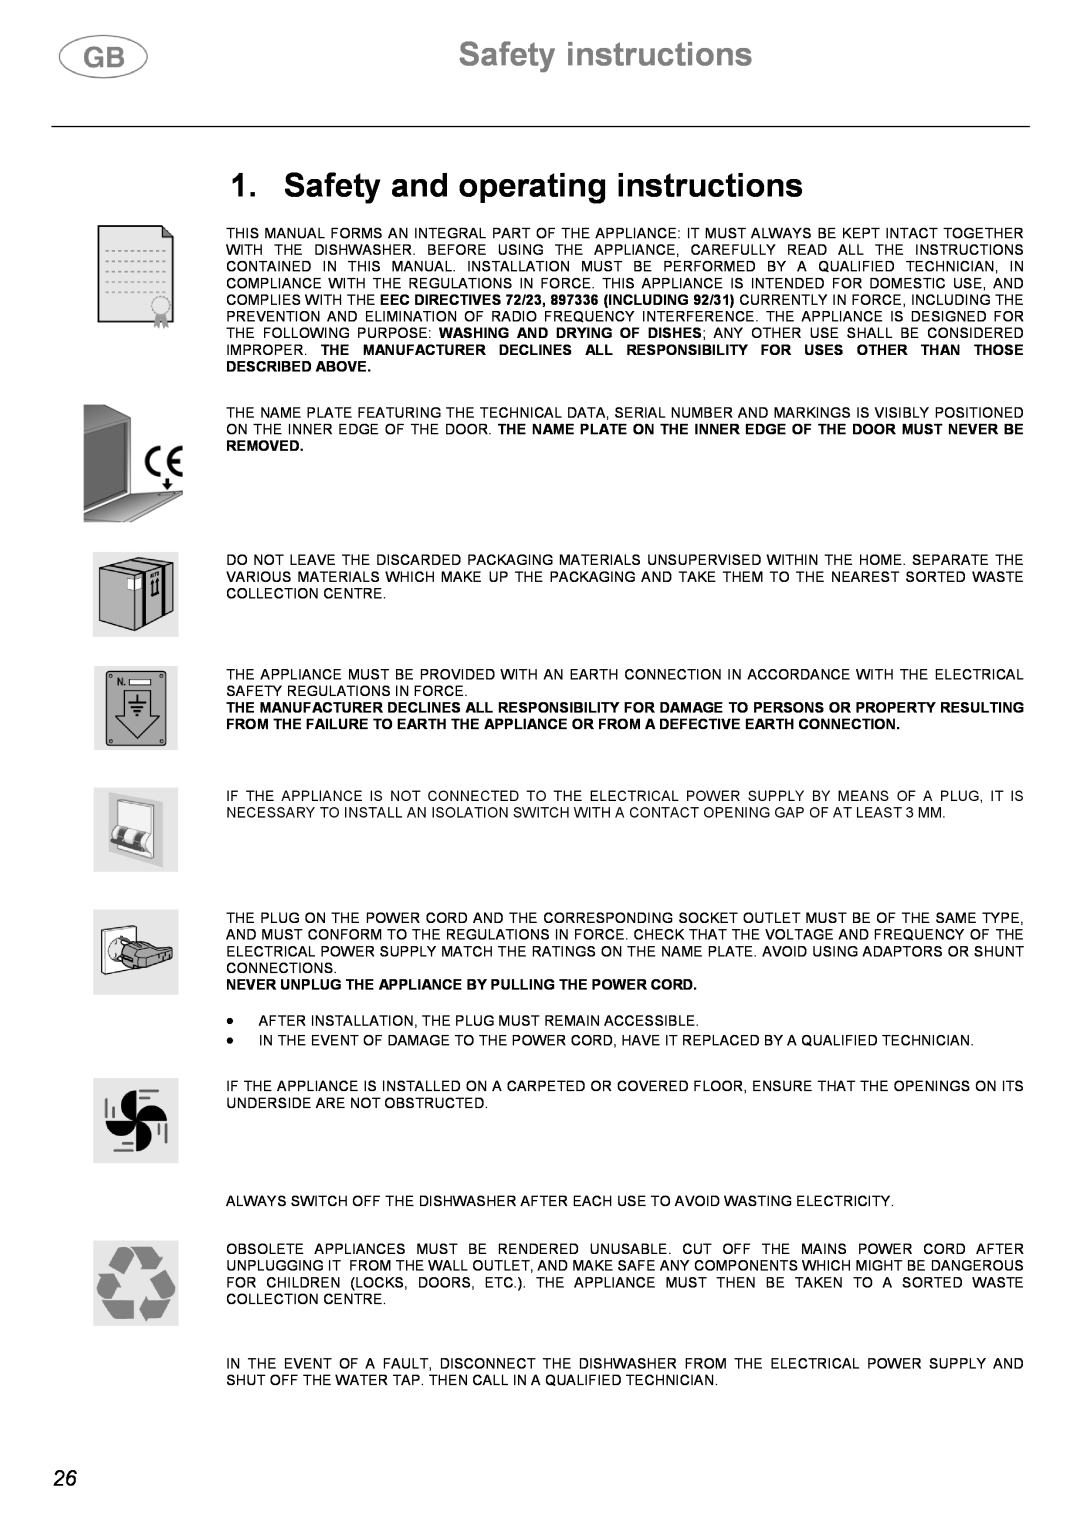 Smeg EL05 instruction manual Safety instructions, Safety and operating instructions, Described Above, Removed 